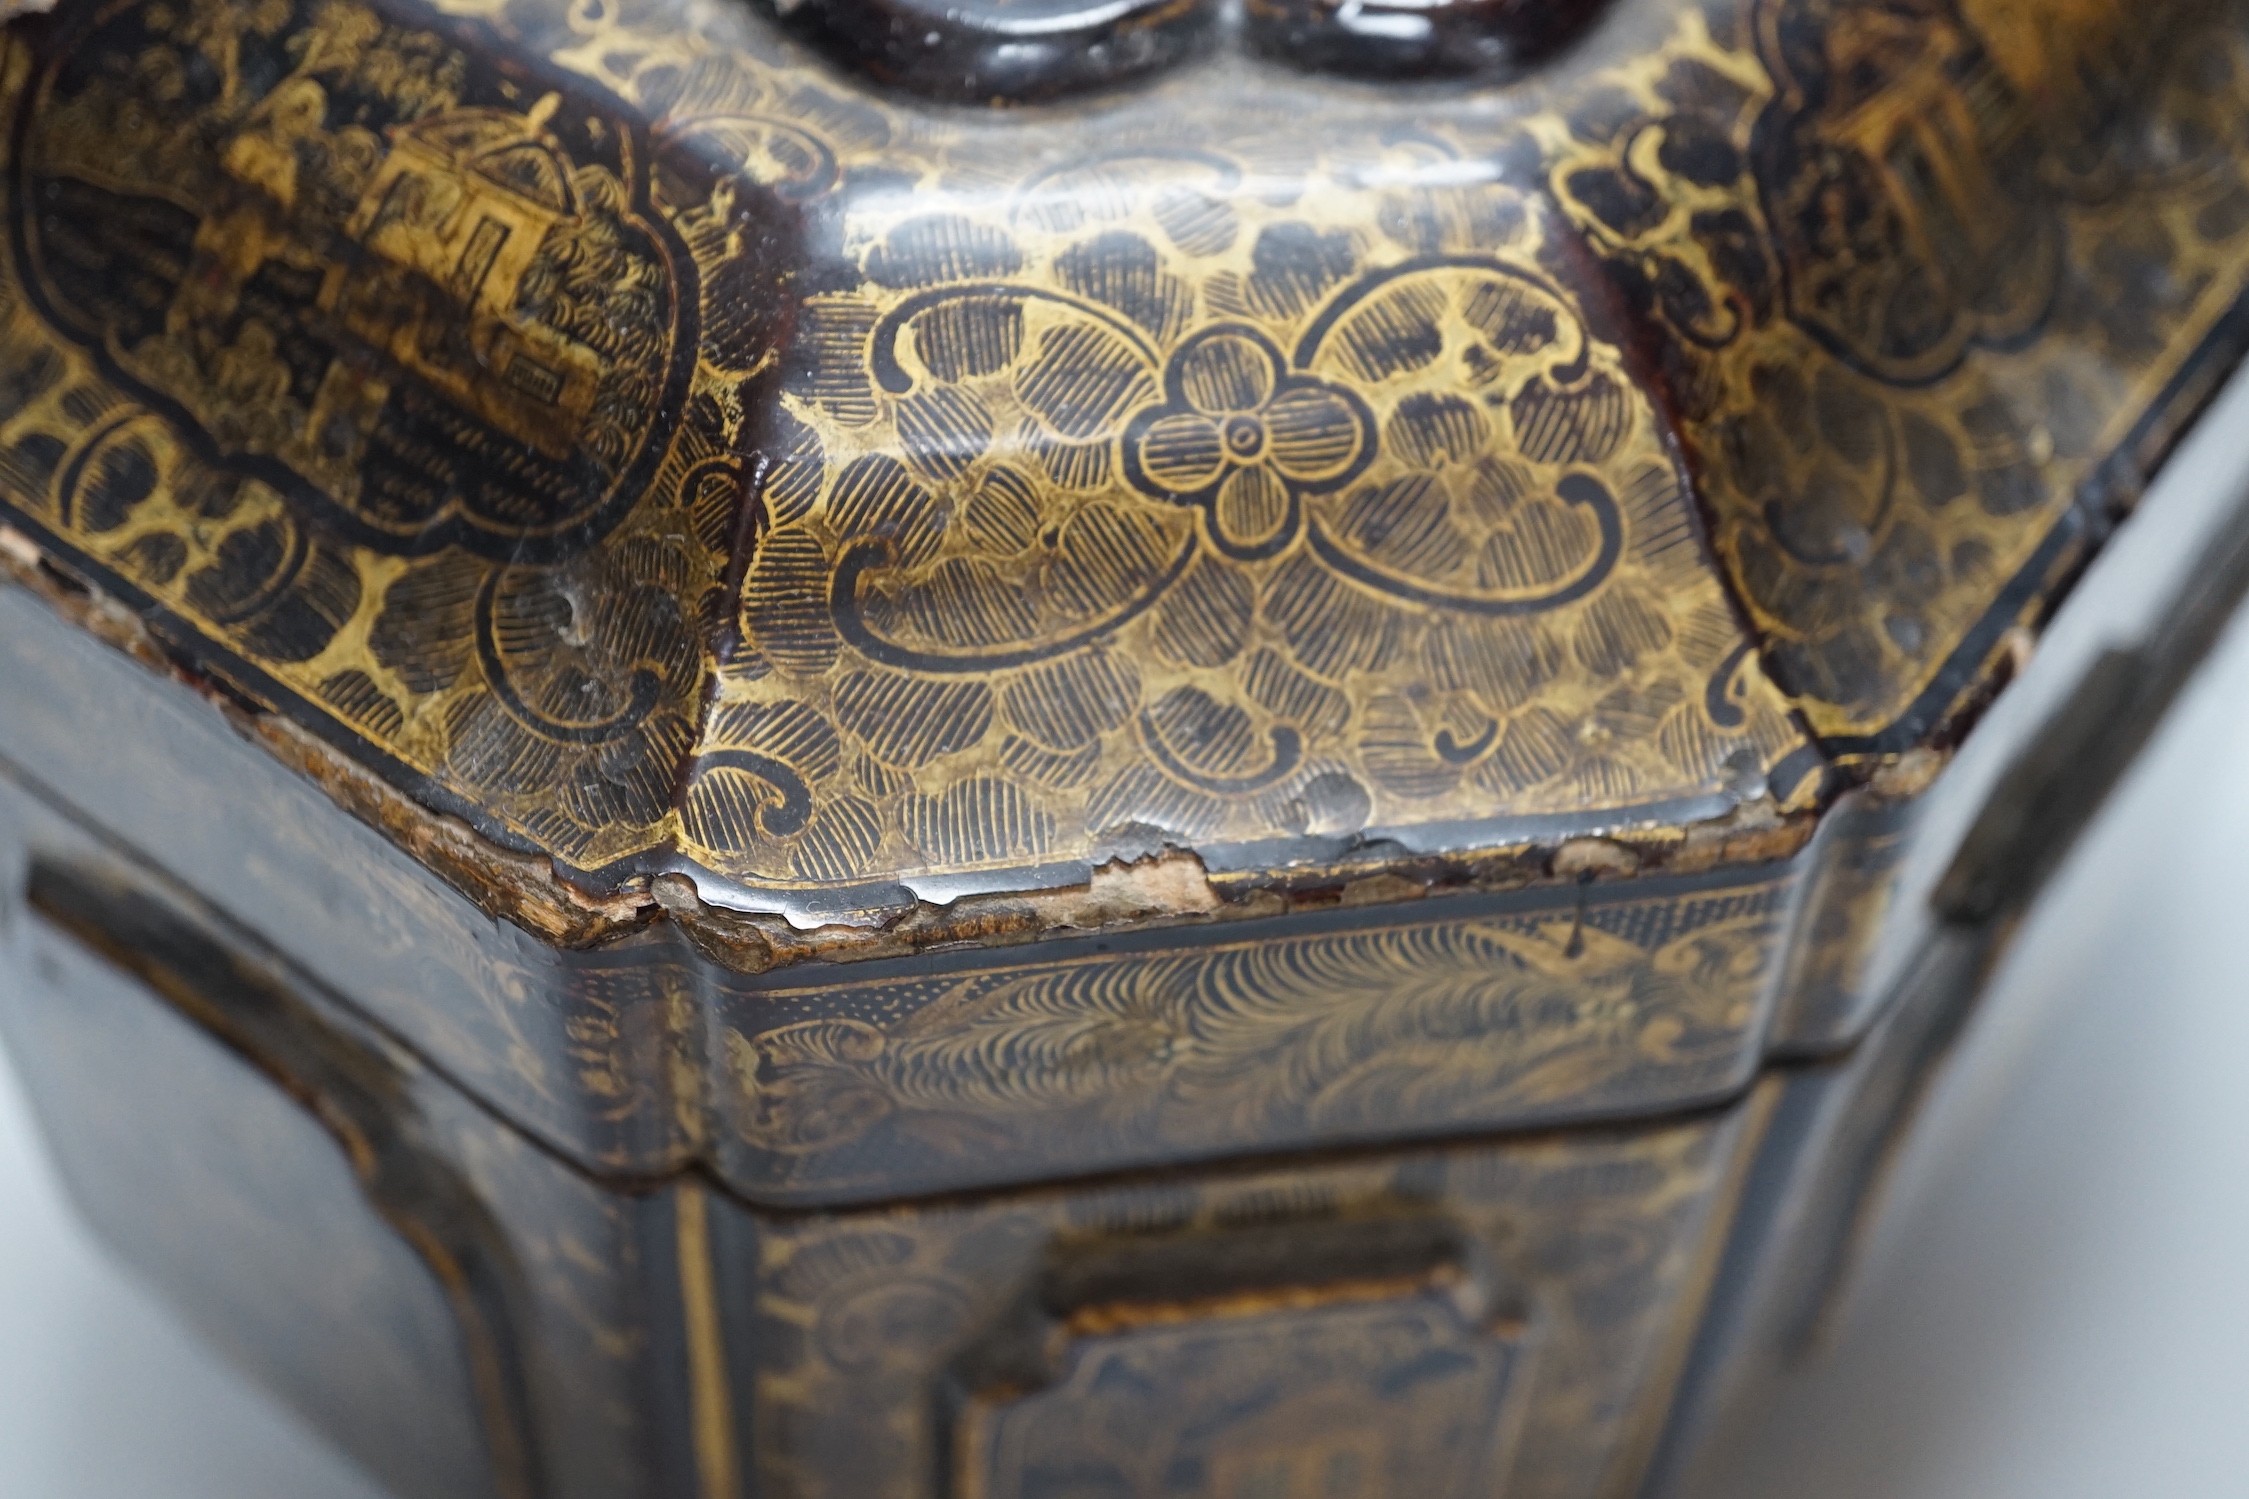 A 19th century Chinese chinoiserie lacquered sarcophagus form tea caddy, pewter lined interior - Image 5 of 6